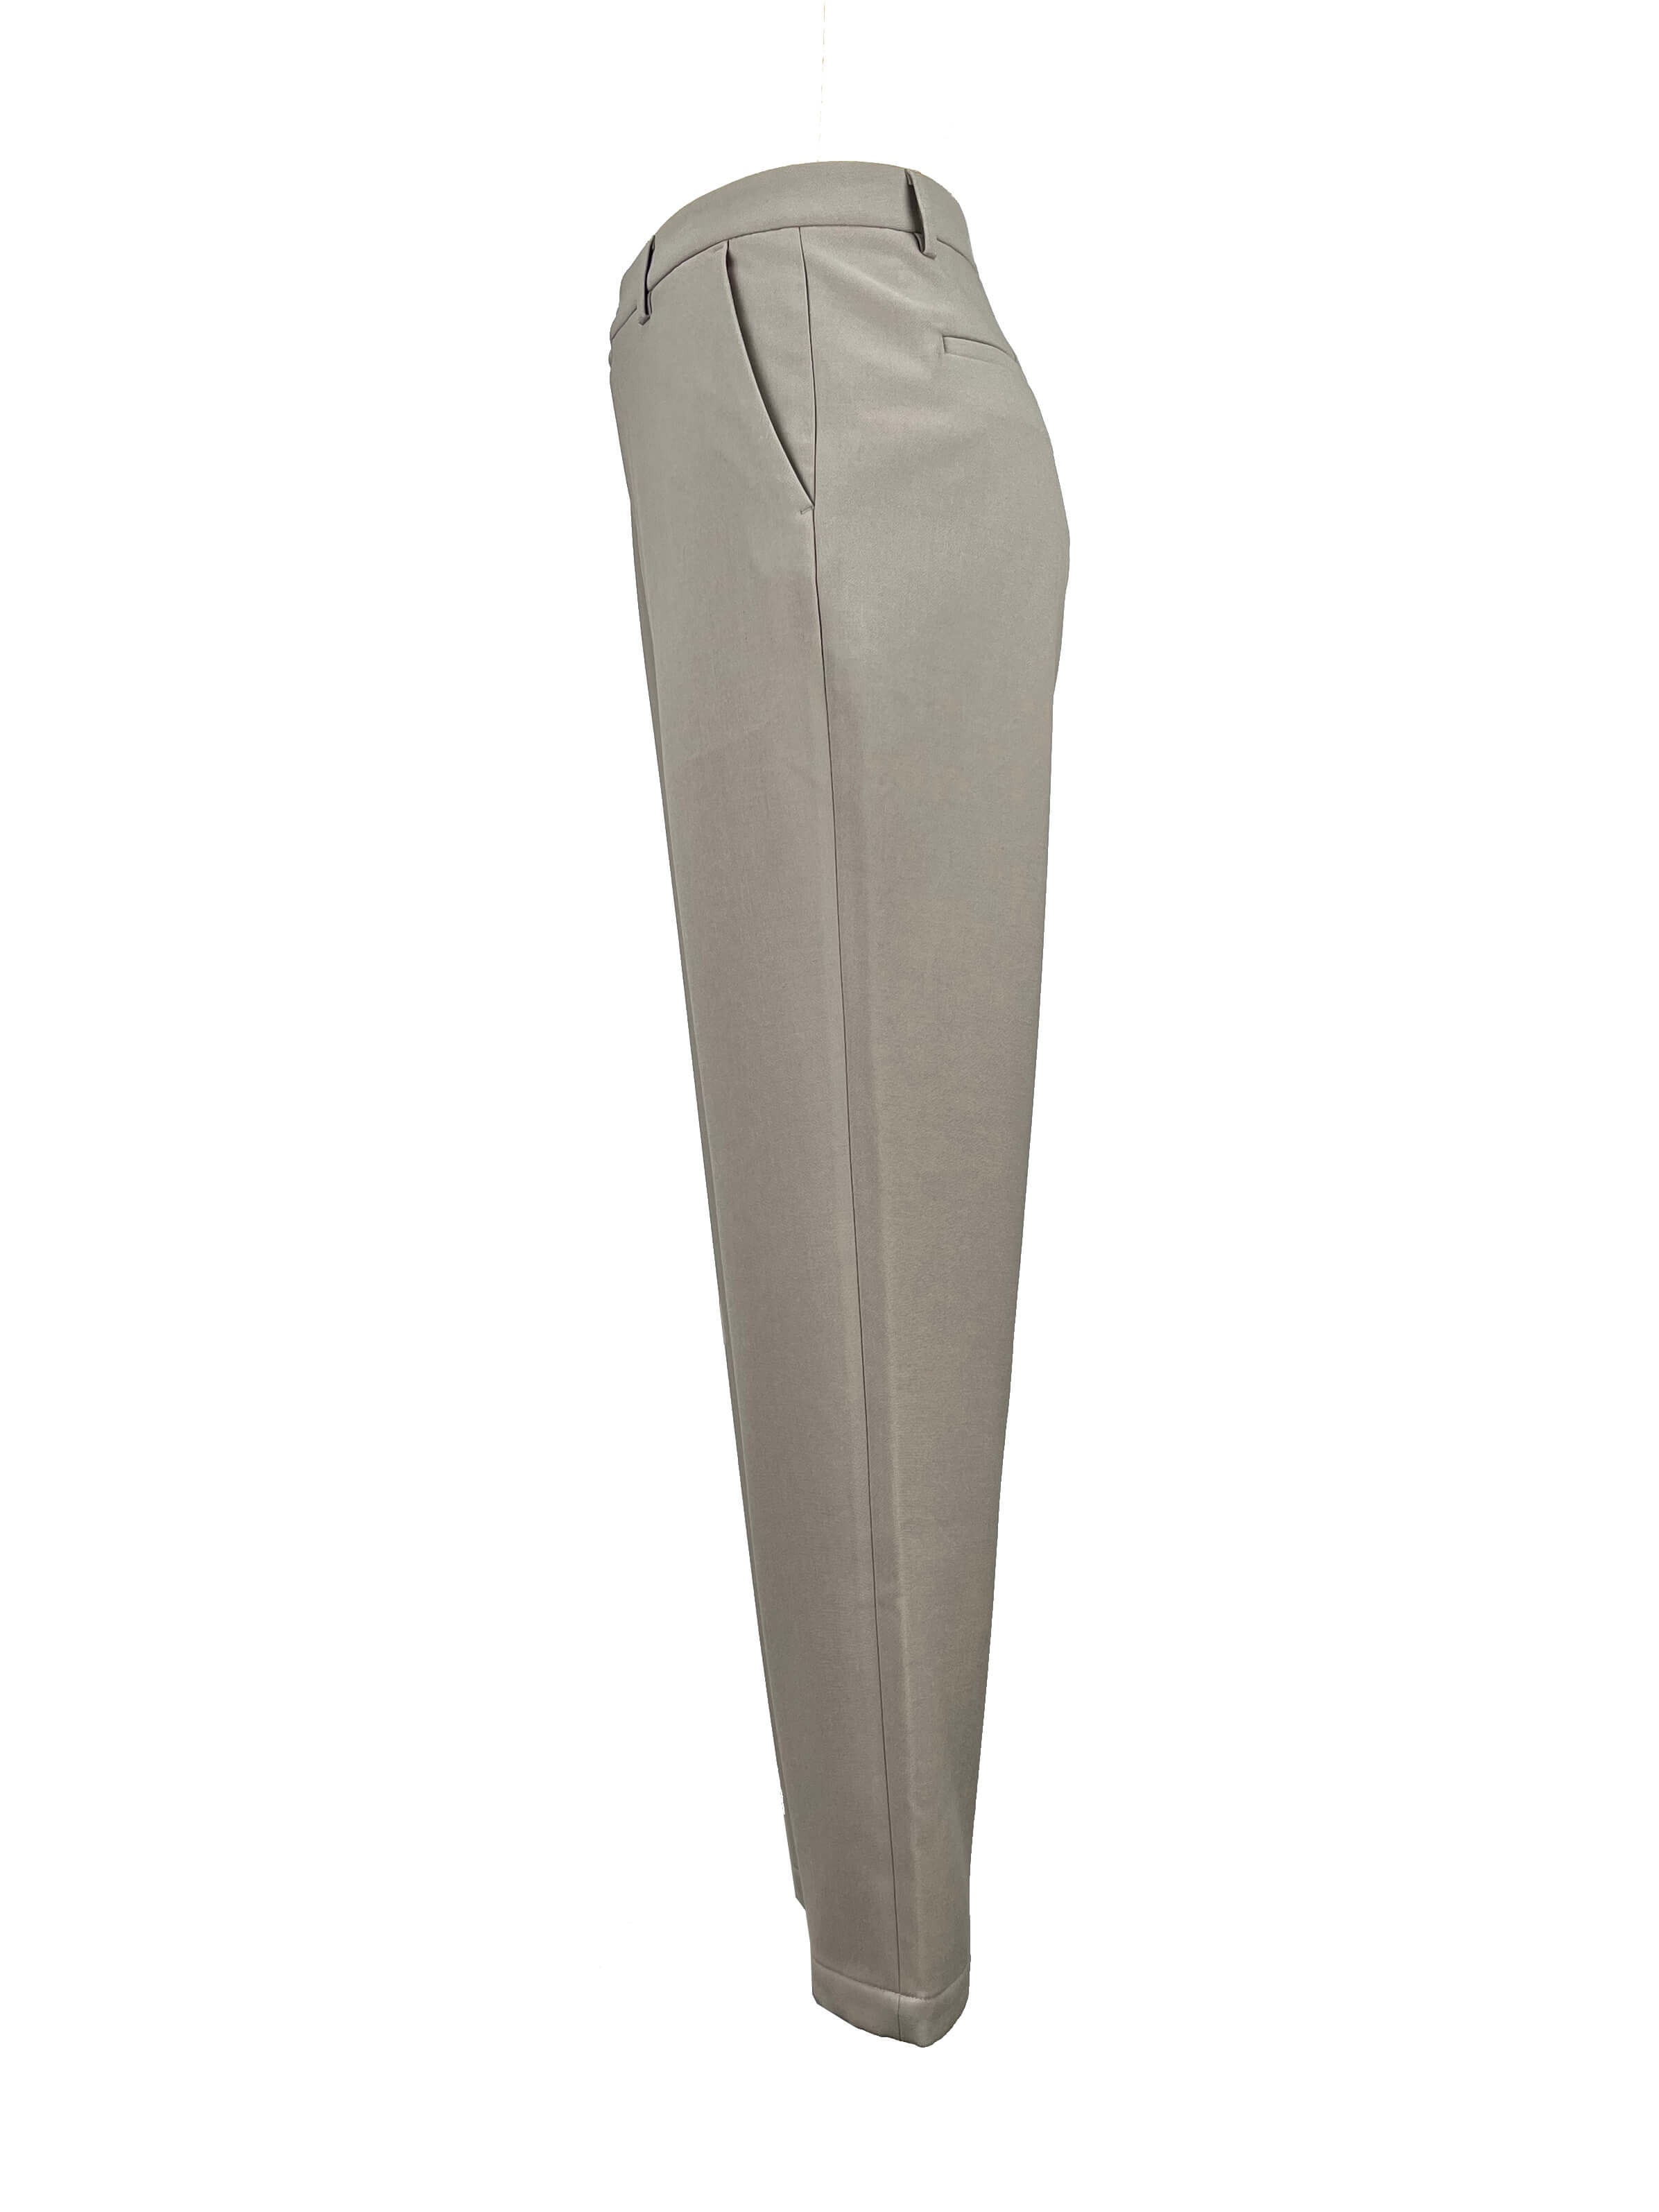 8.trousers (3)